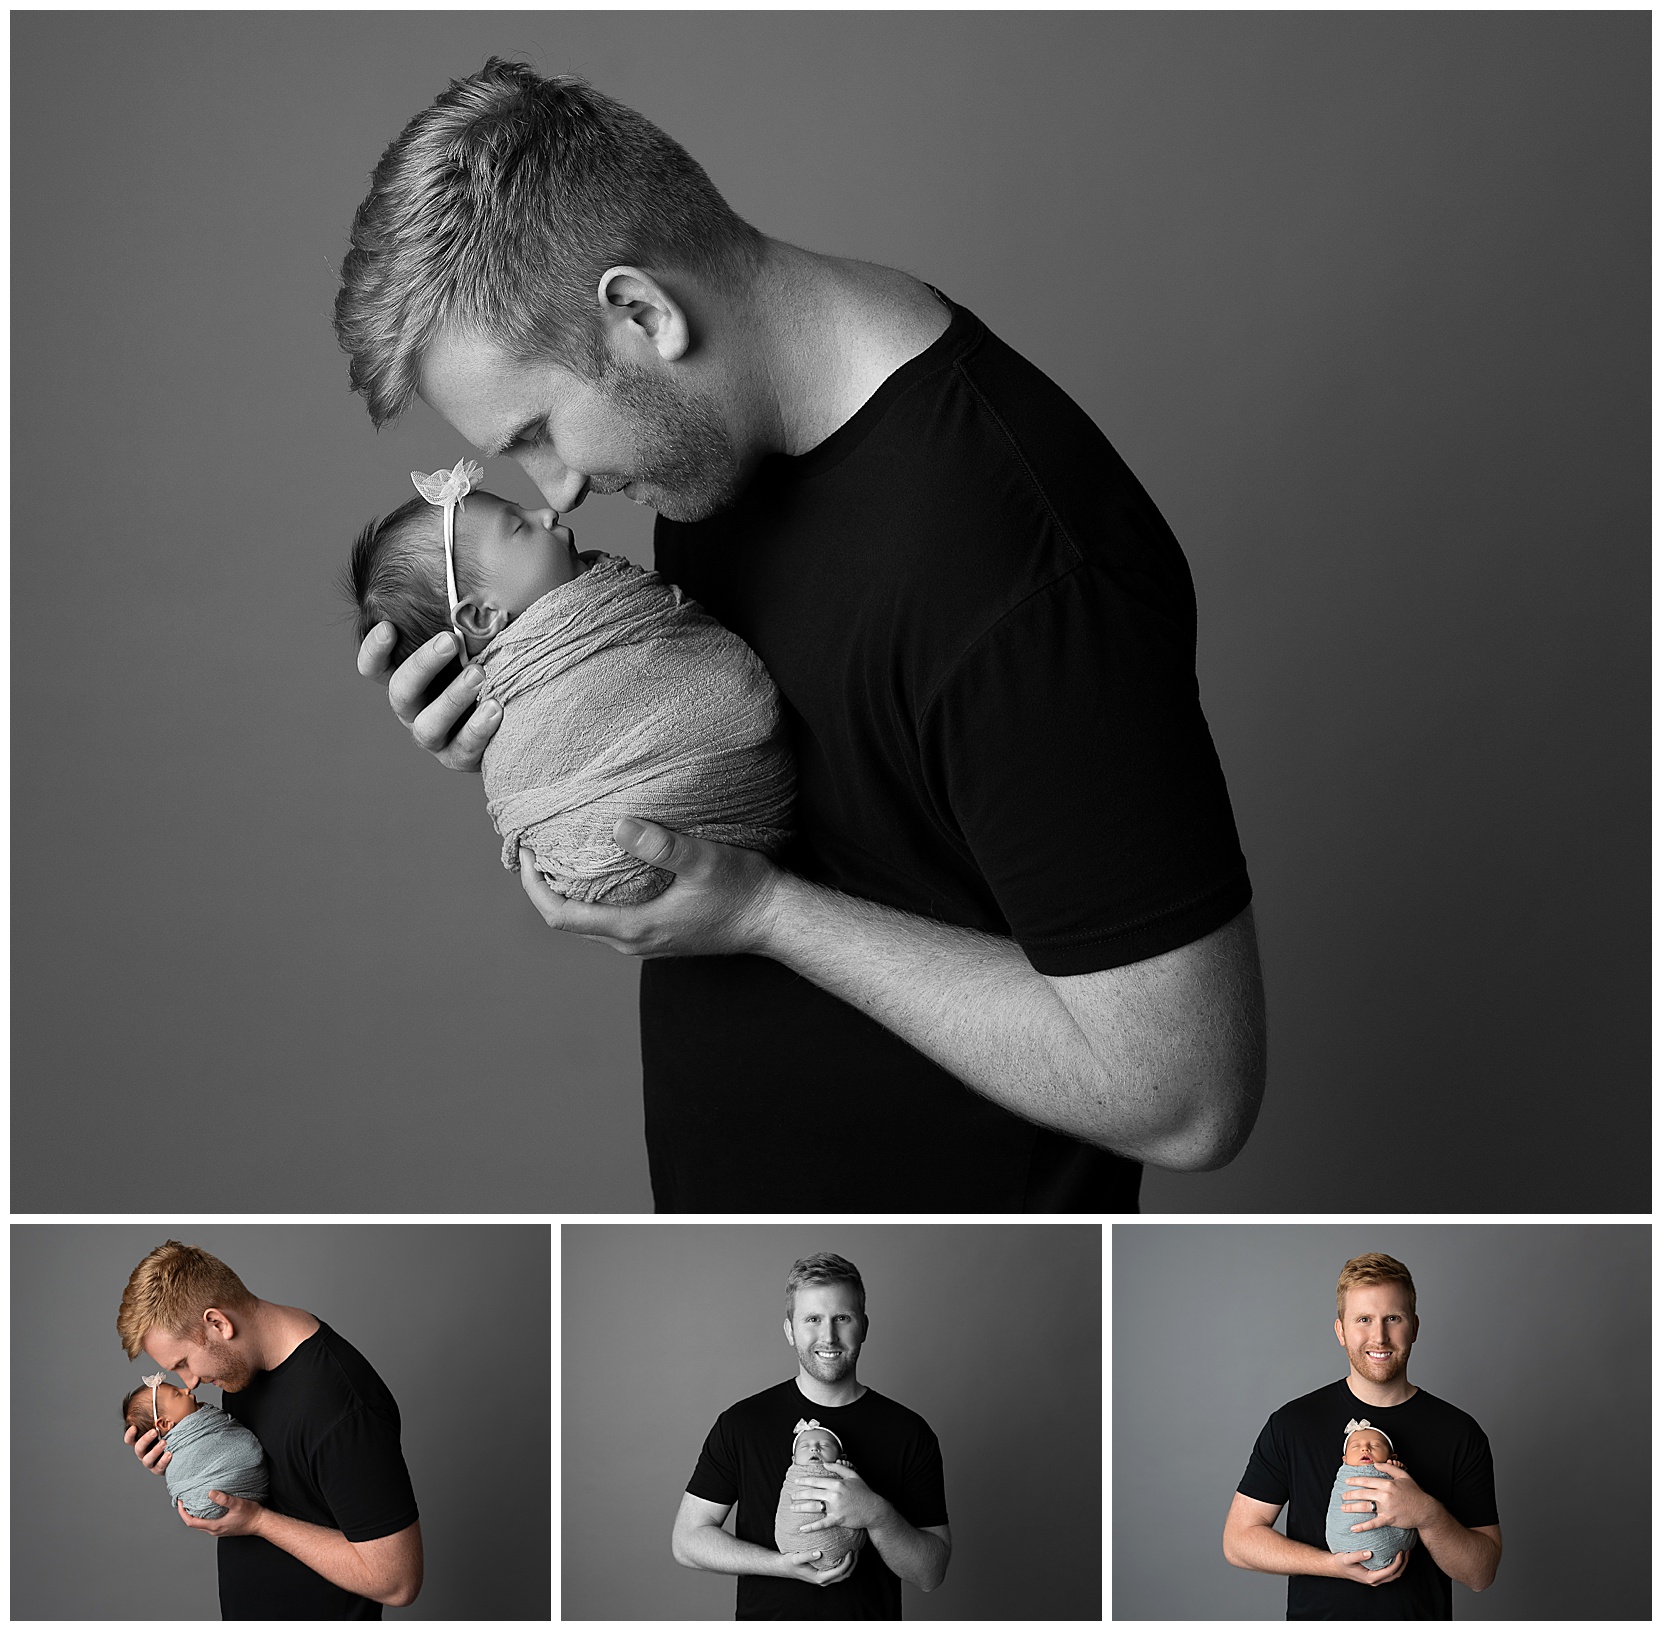 Photo montage featuring a young man holding his newborn baby in various poses